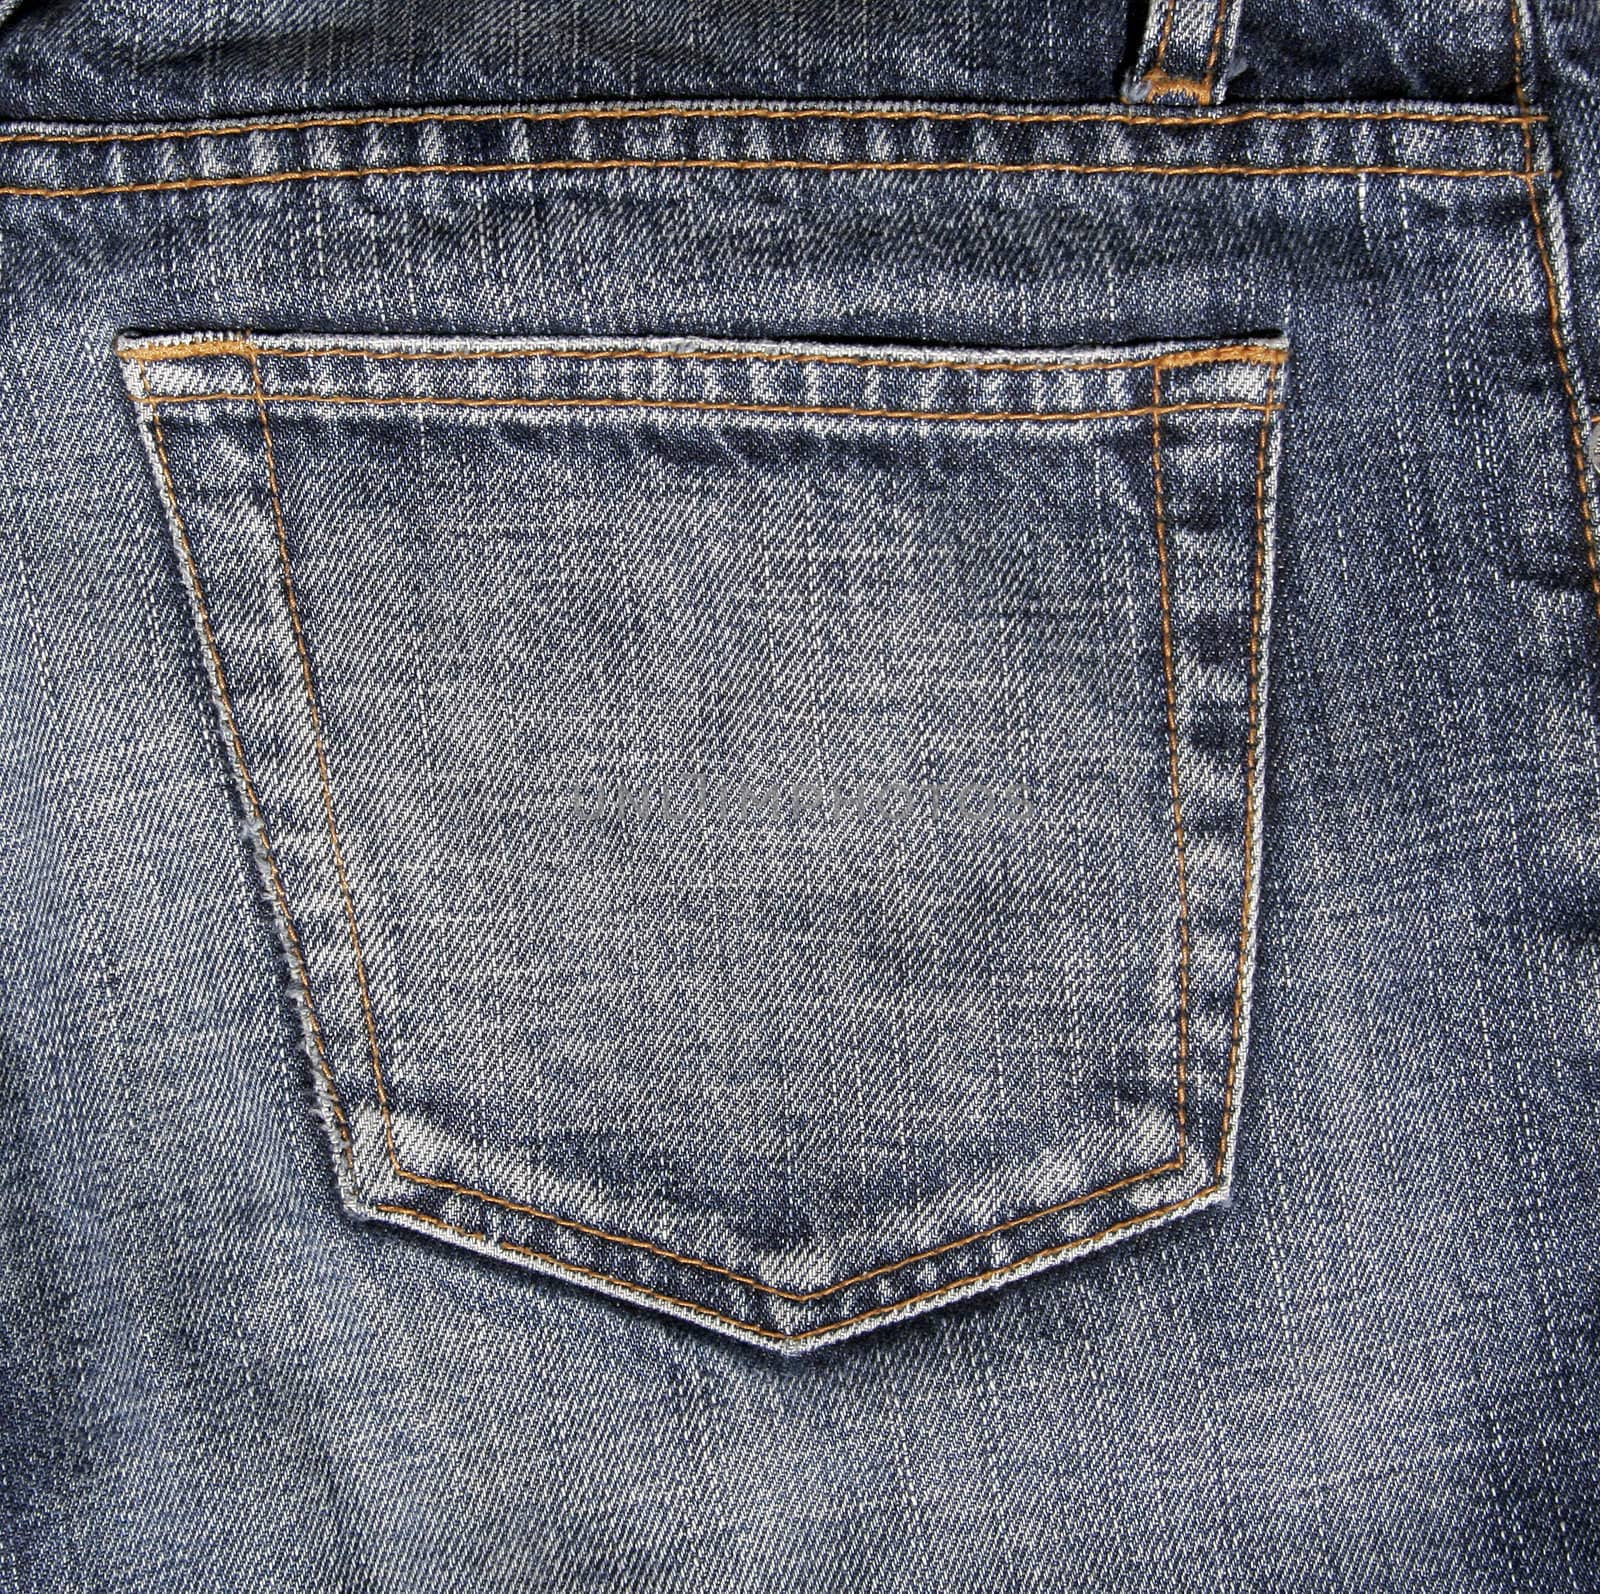 Jeans Pocket by thorsten